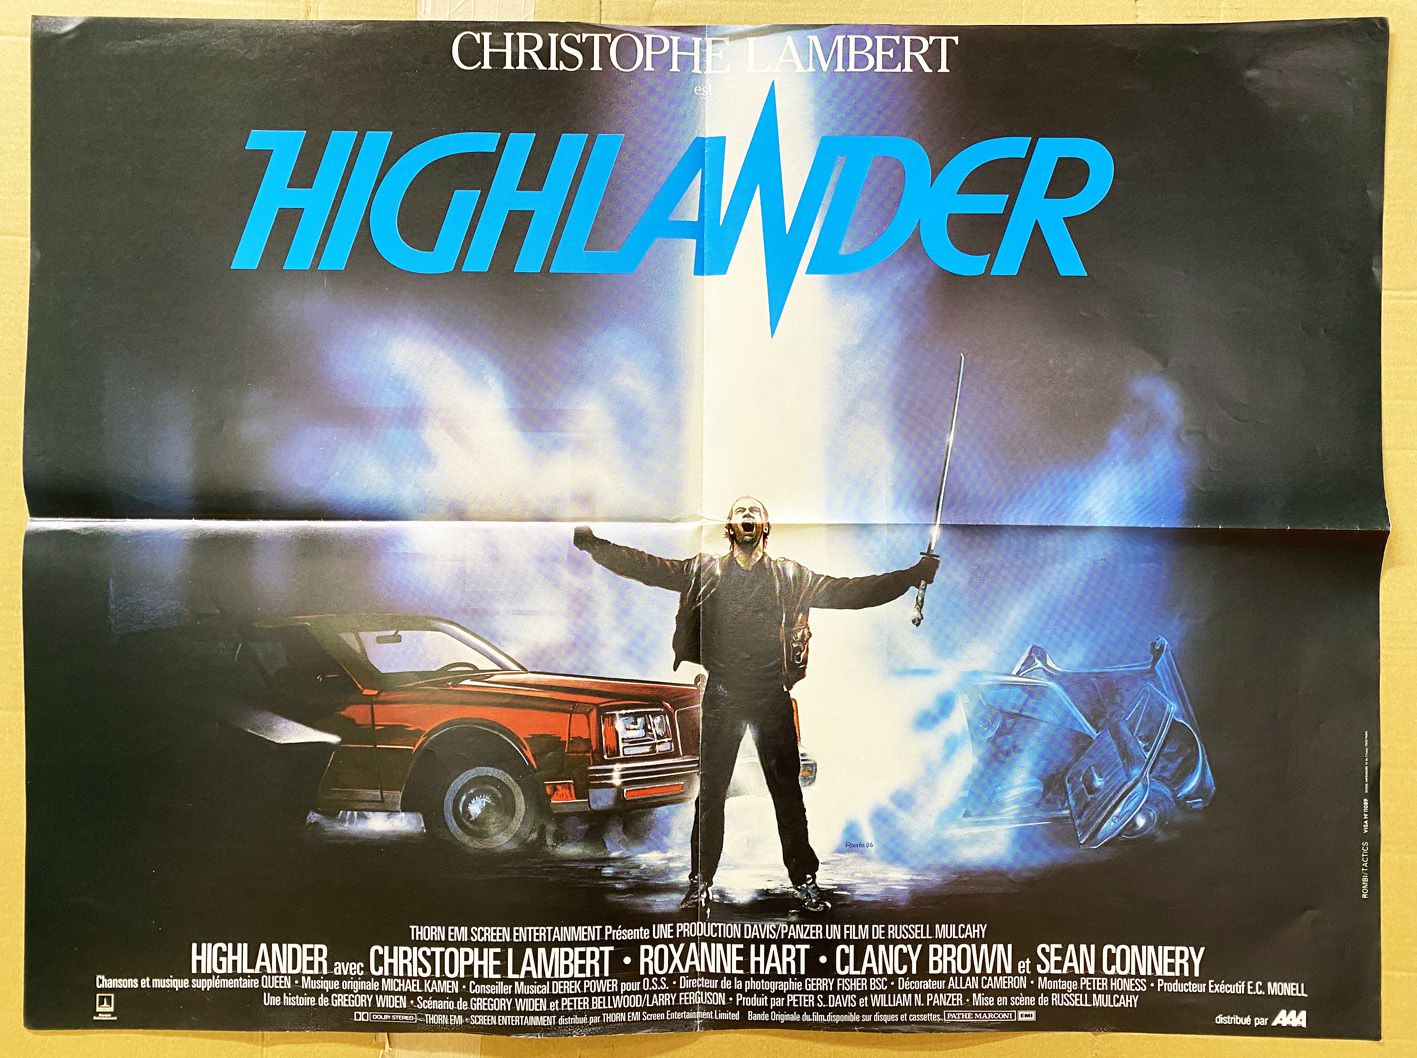 Highlander - Movie Poster 60x80cm - Columbia Pictures 1986